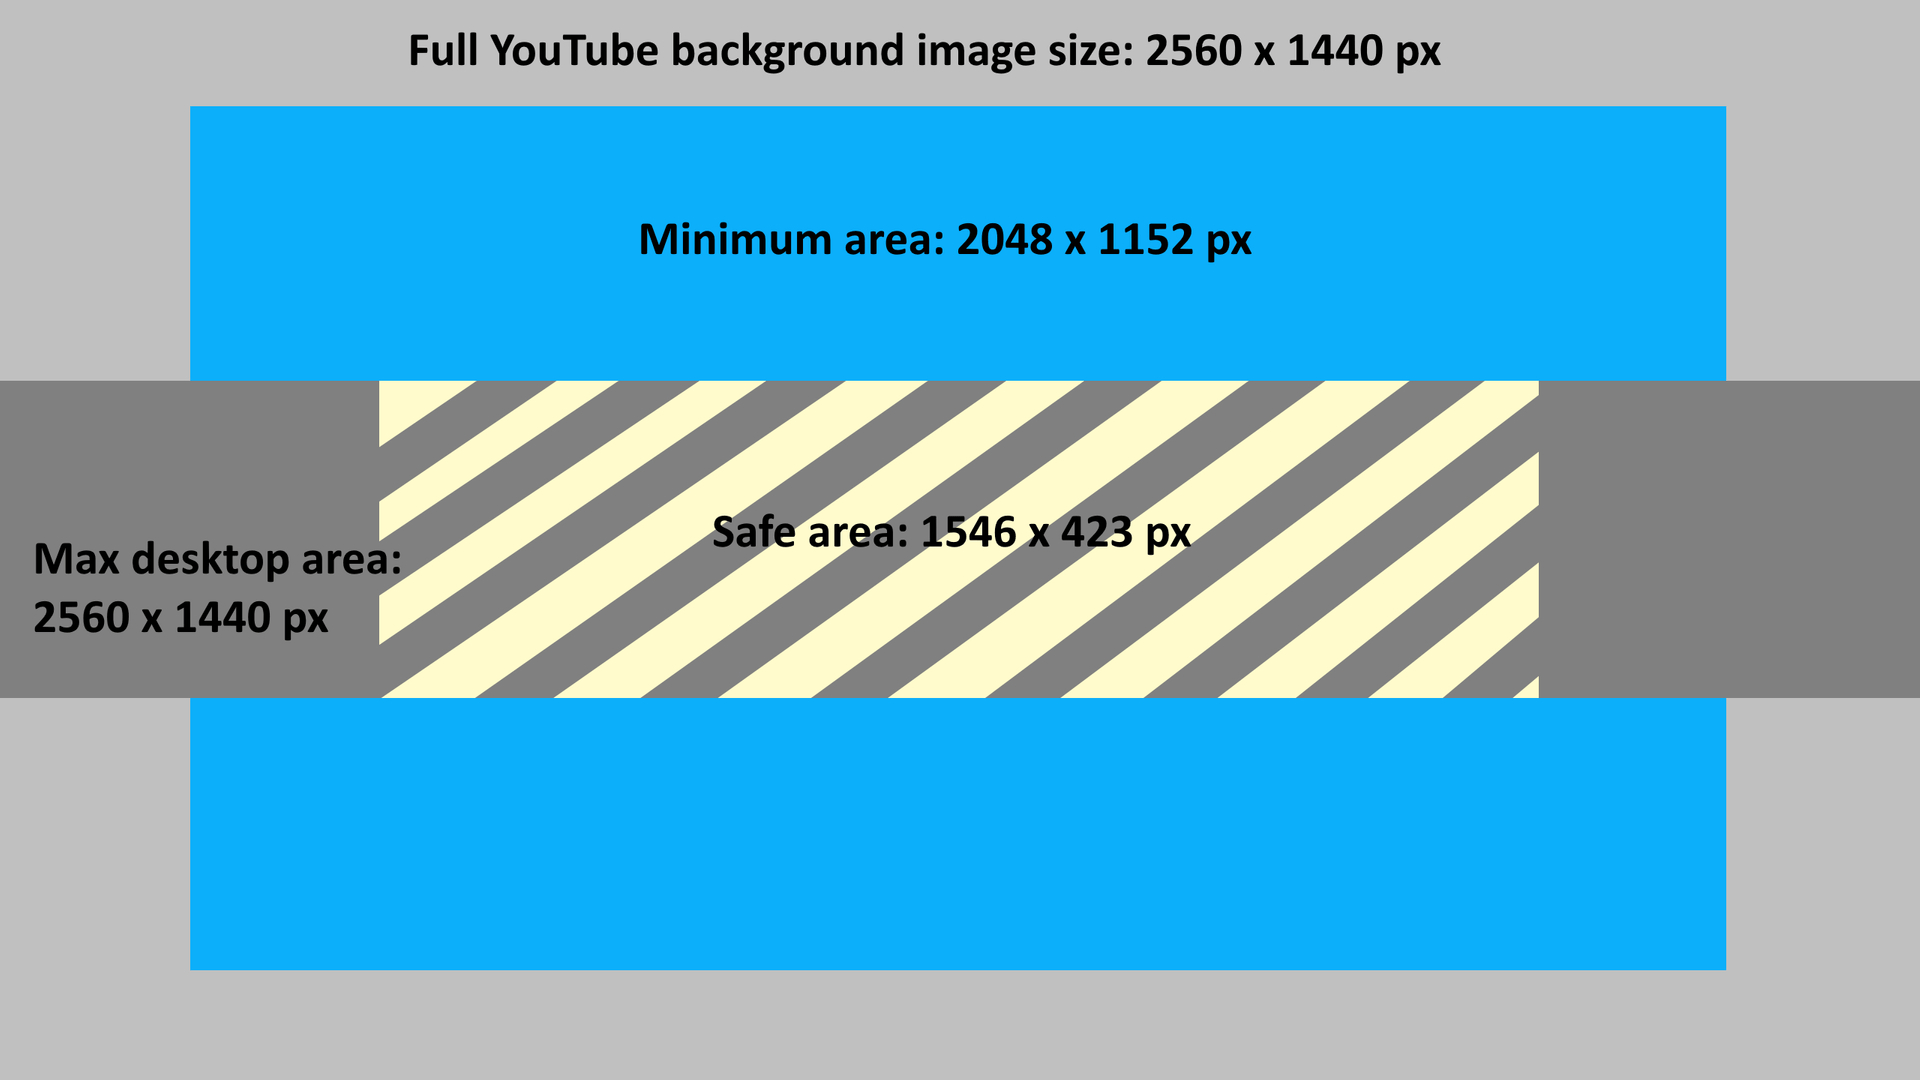 The Best Youtube Banner Size In 2020 + Best Practices For With Youtube Banner Template Size